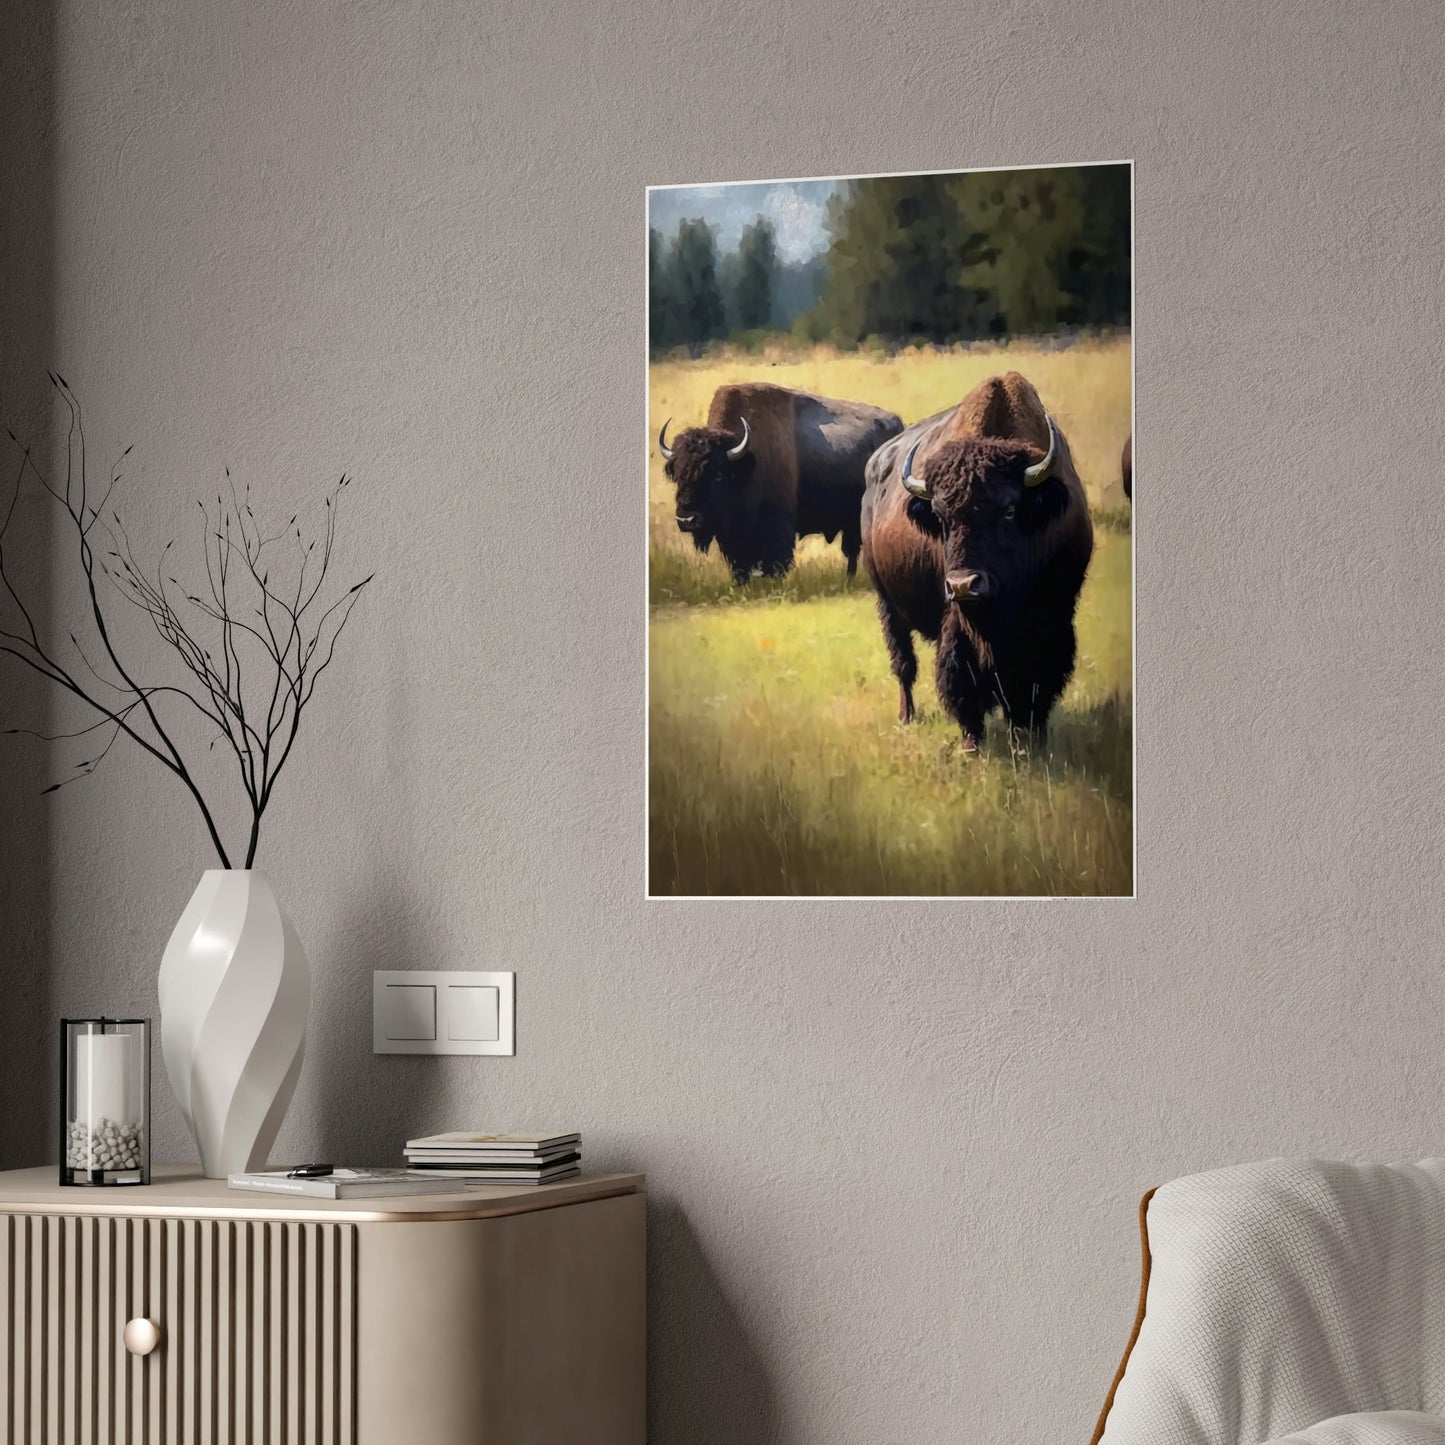 The Bison's Journey: A Print on Canvas & Poster of a Bisons Trekking Across the Plains